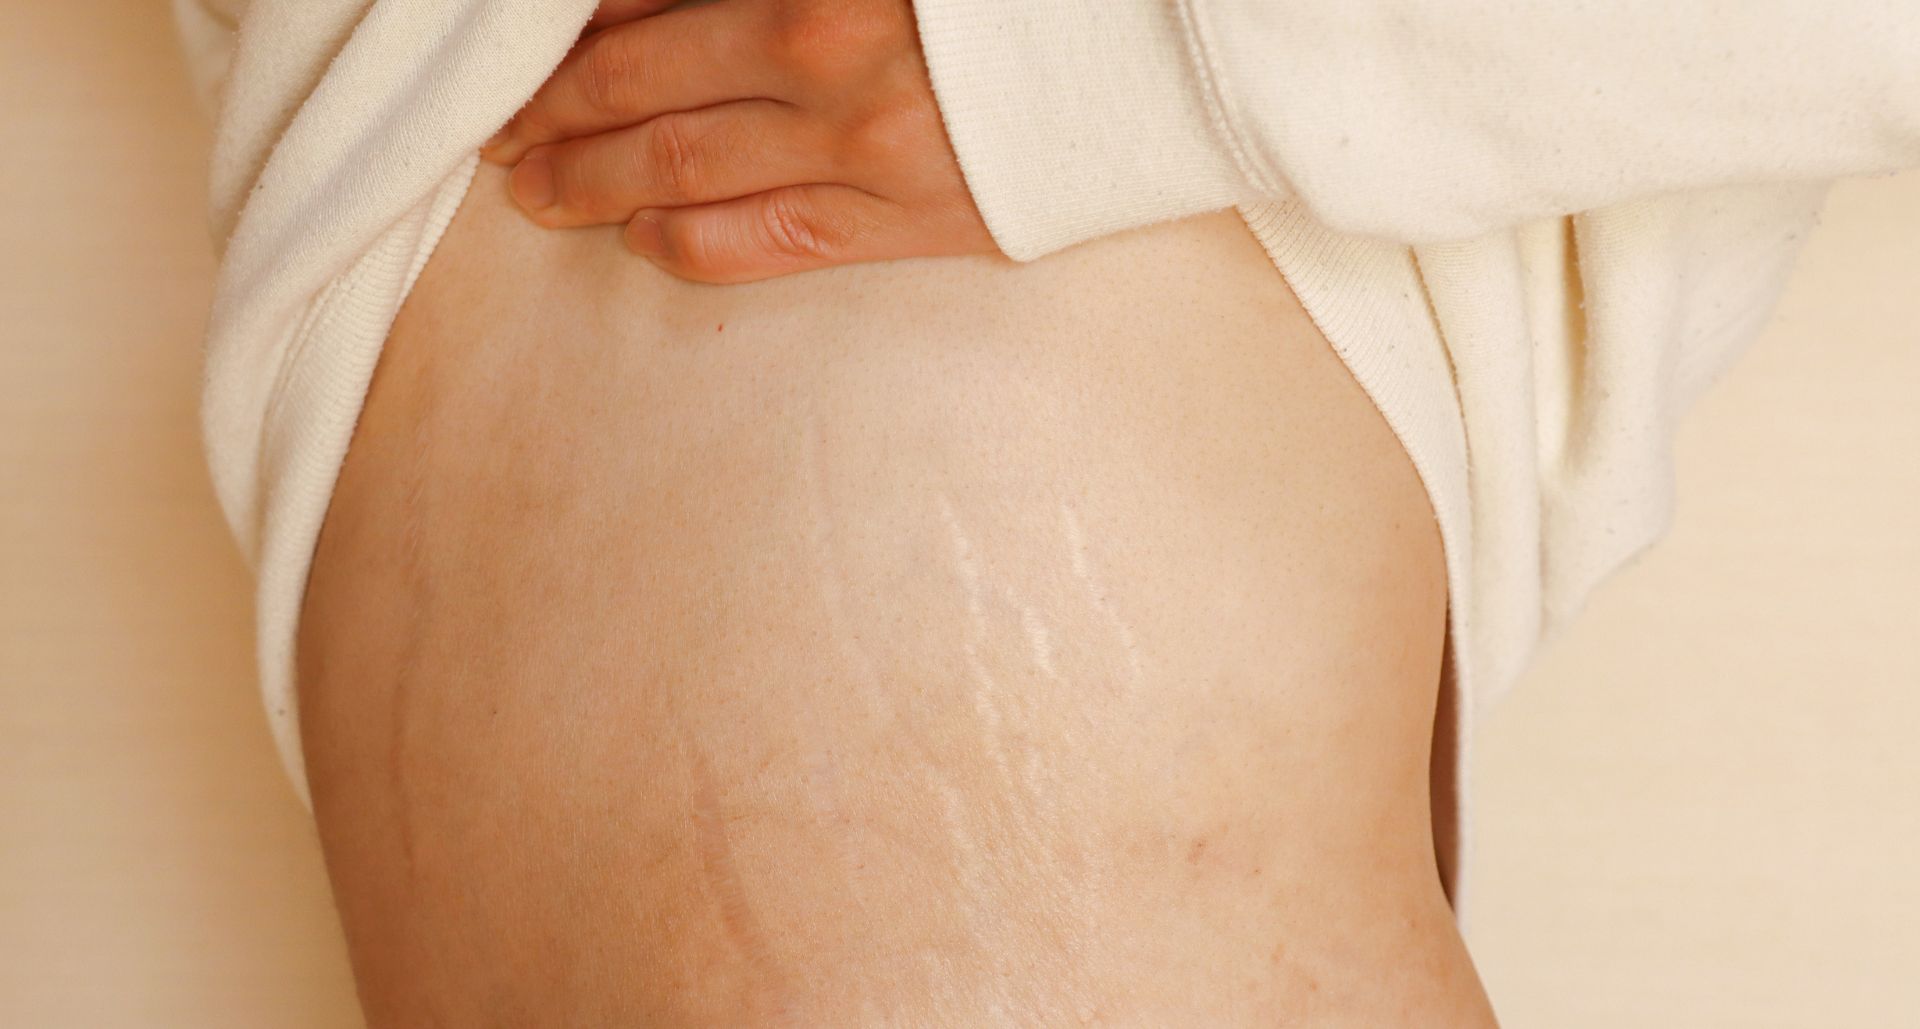 How Can I Get Rid of Abdominal Stretch Marks?